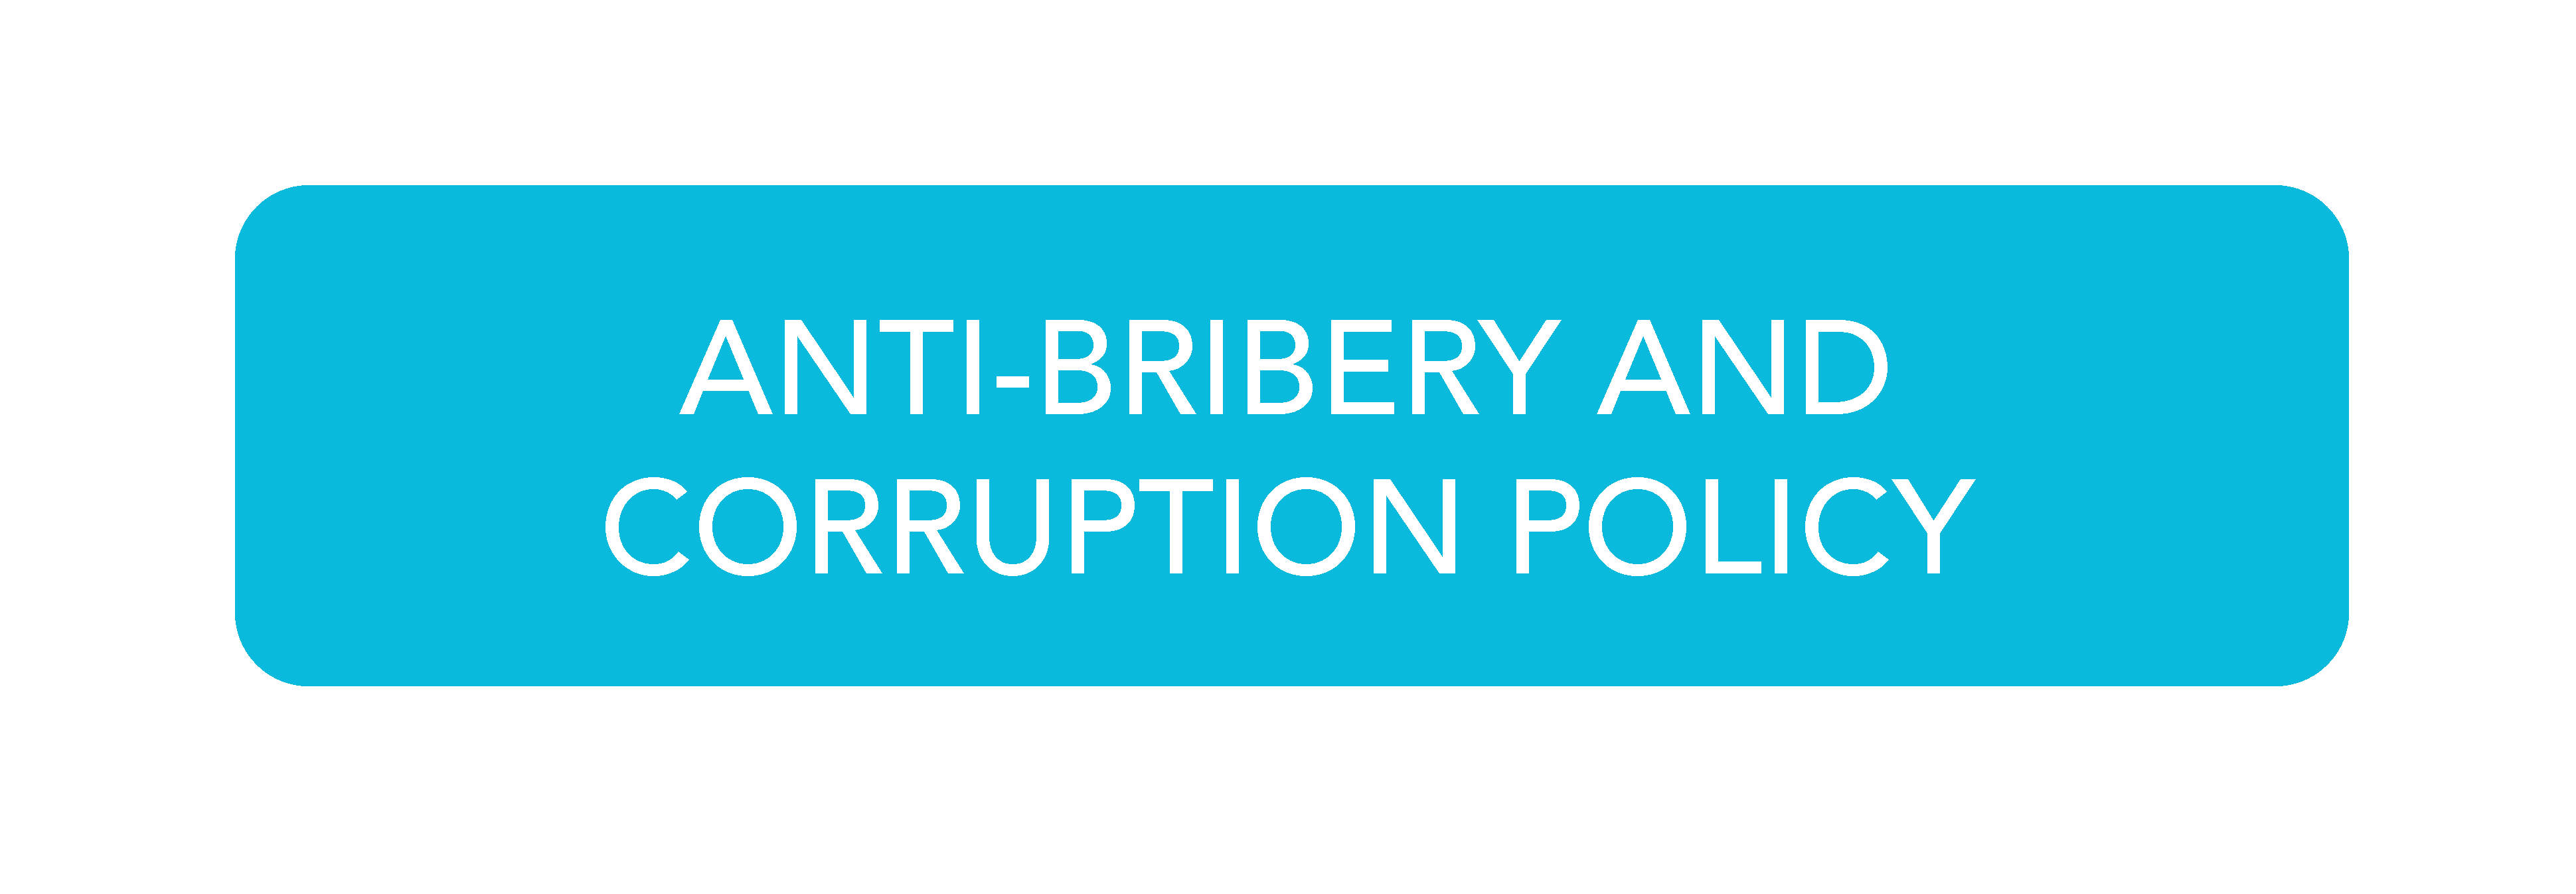 ANTI-BRIBERY AND CORRUPTION POLICY.png